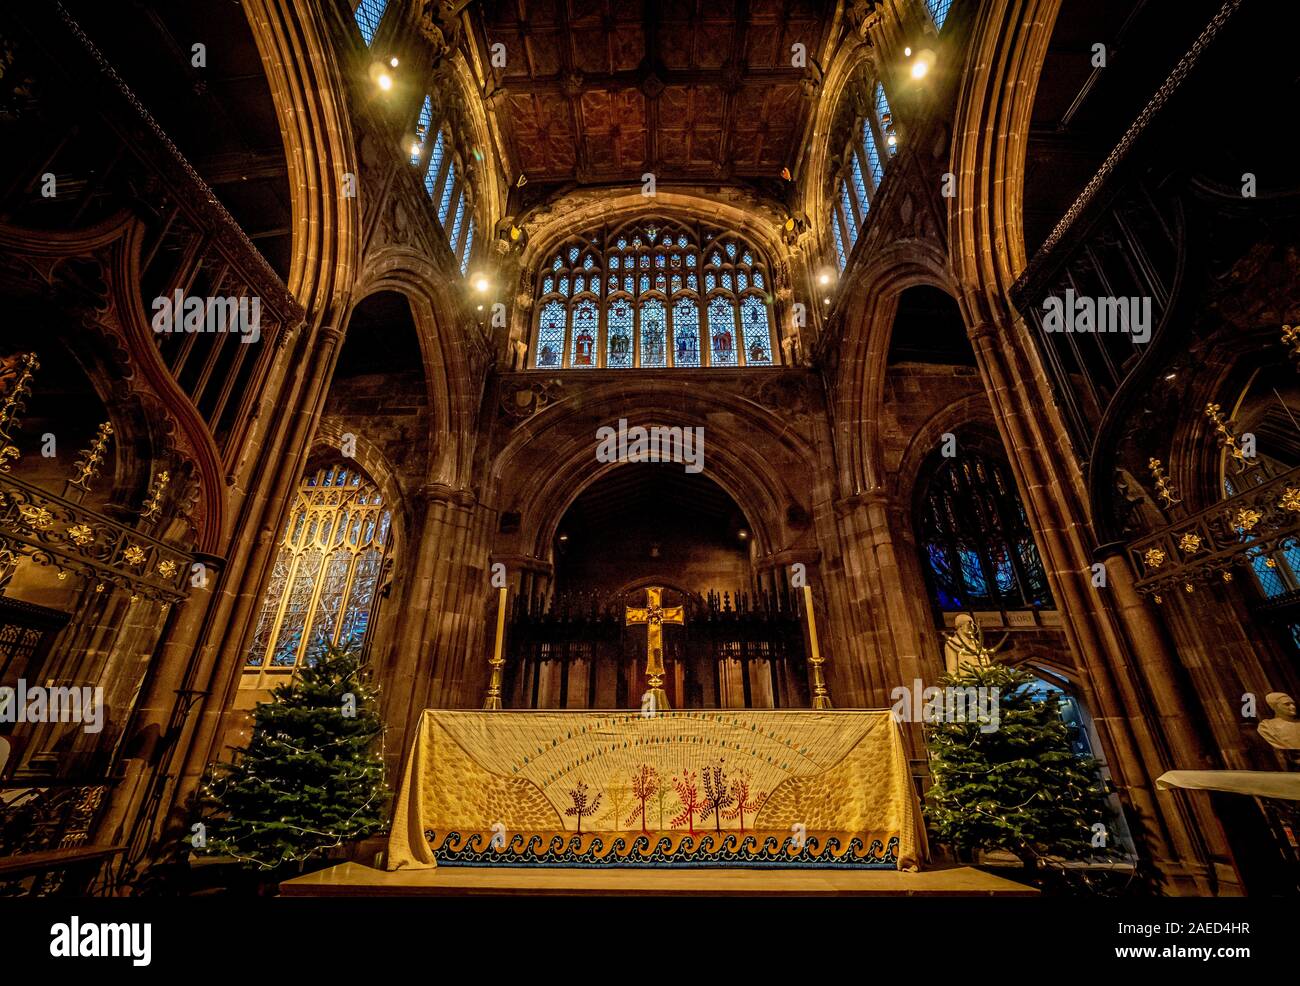 Manchester Cathedral interior Stock Photo